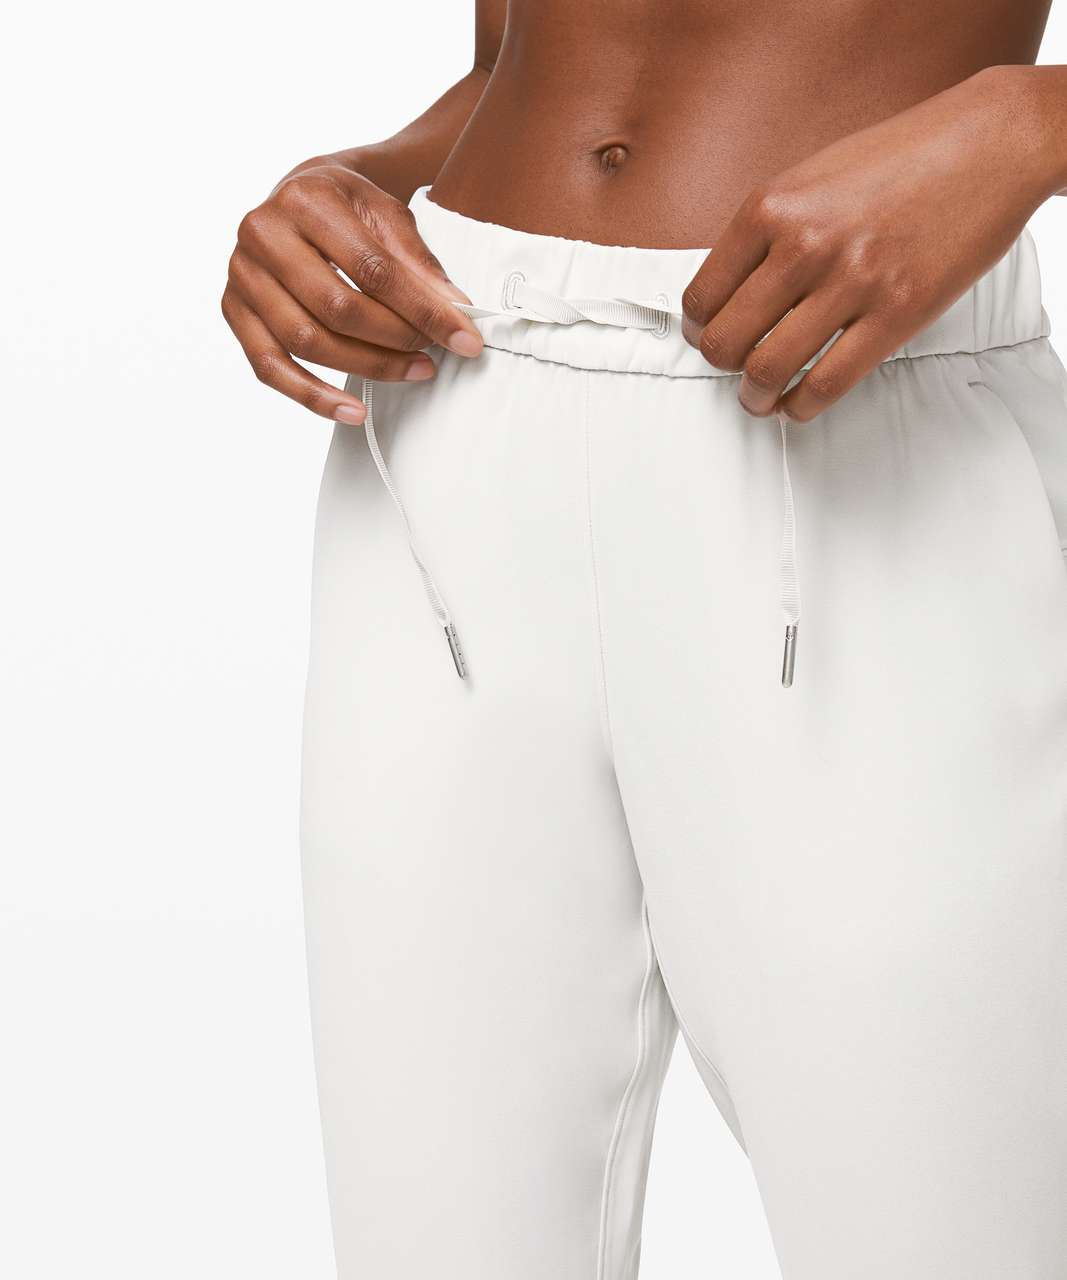 Lululemon On the Fly Pant Tall *Woven - Silverstone